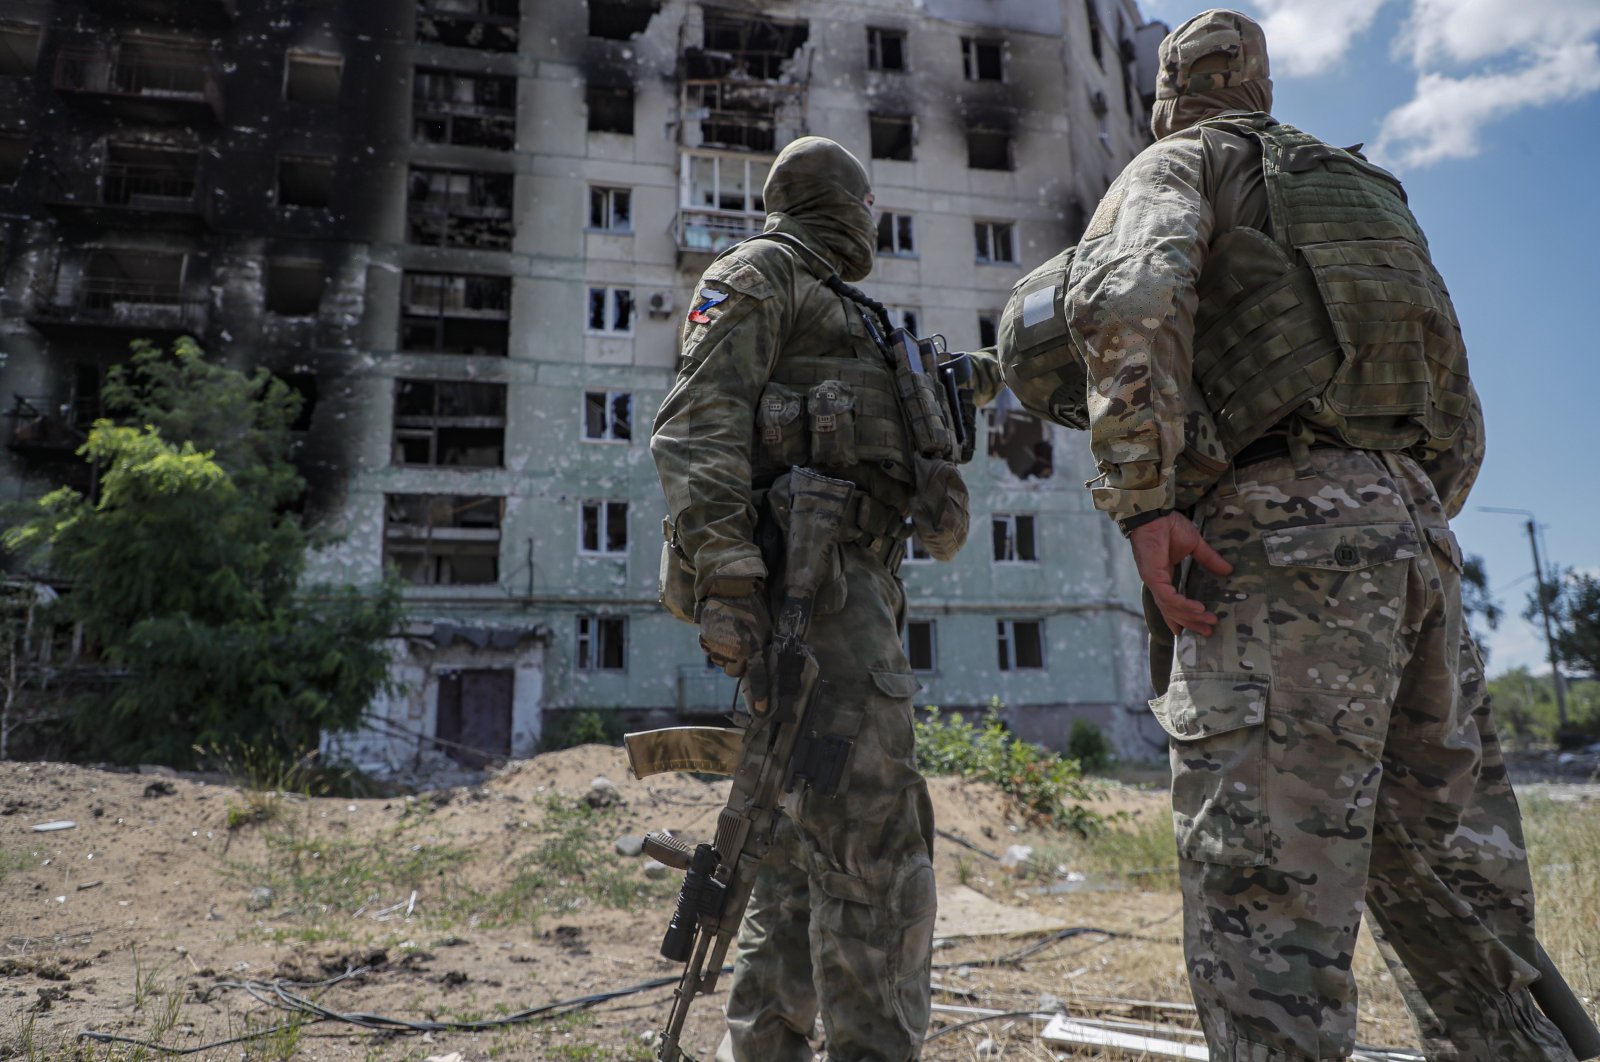 A picture taken during a visit to Lysychansk organized by the Russian military shows Russian servicemen guarding near a destroyed apartment building in Severodonetsk, Luhansk region, Ukraine, July 12, 2022. (EPA Photo)